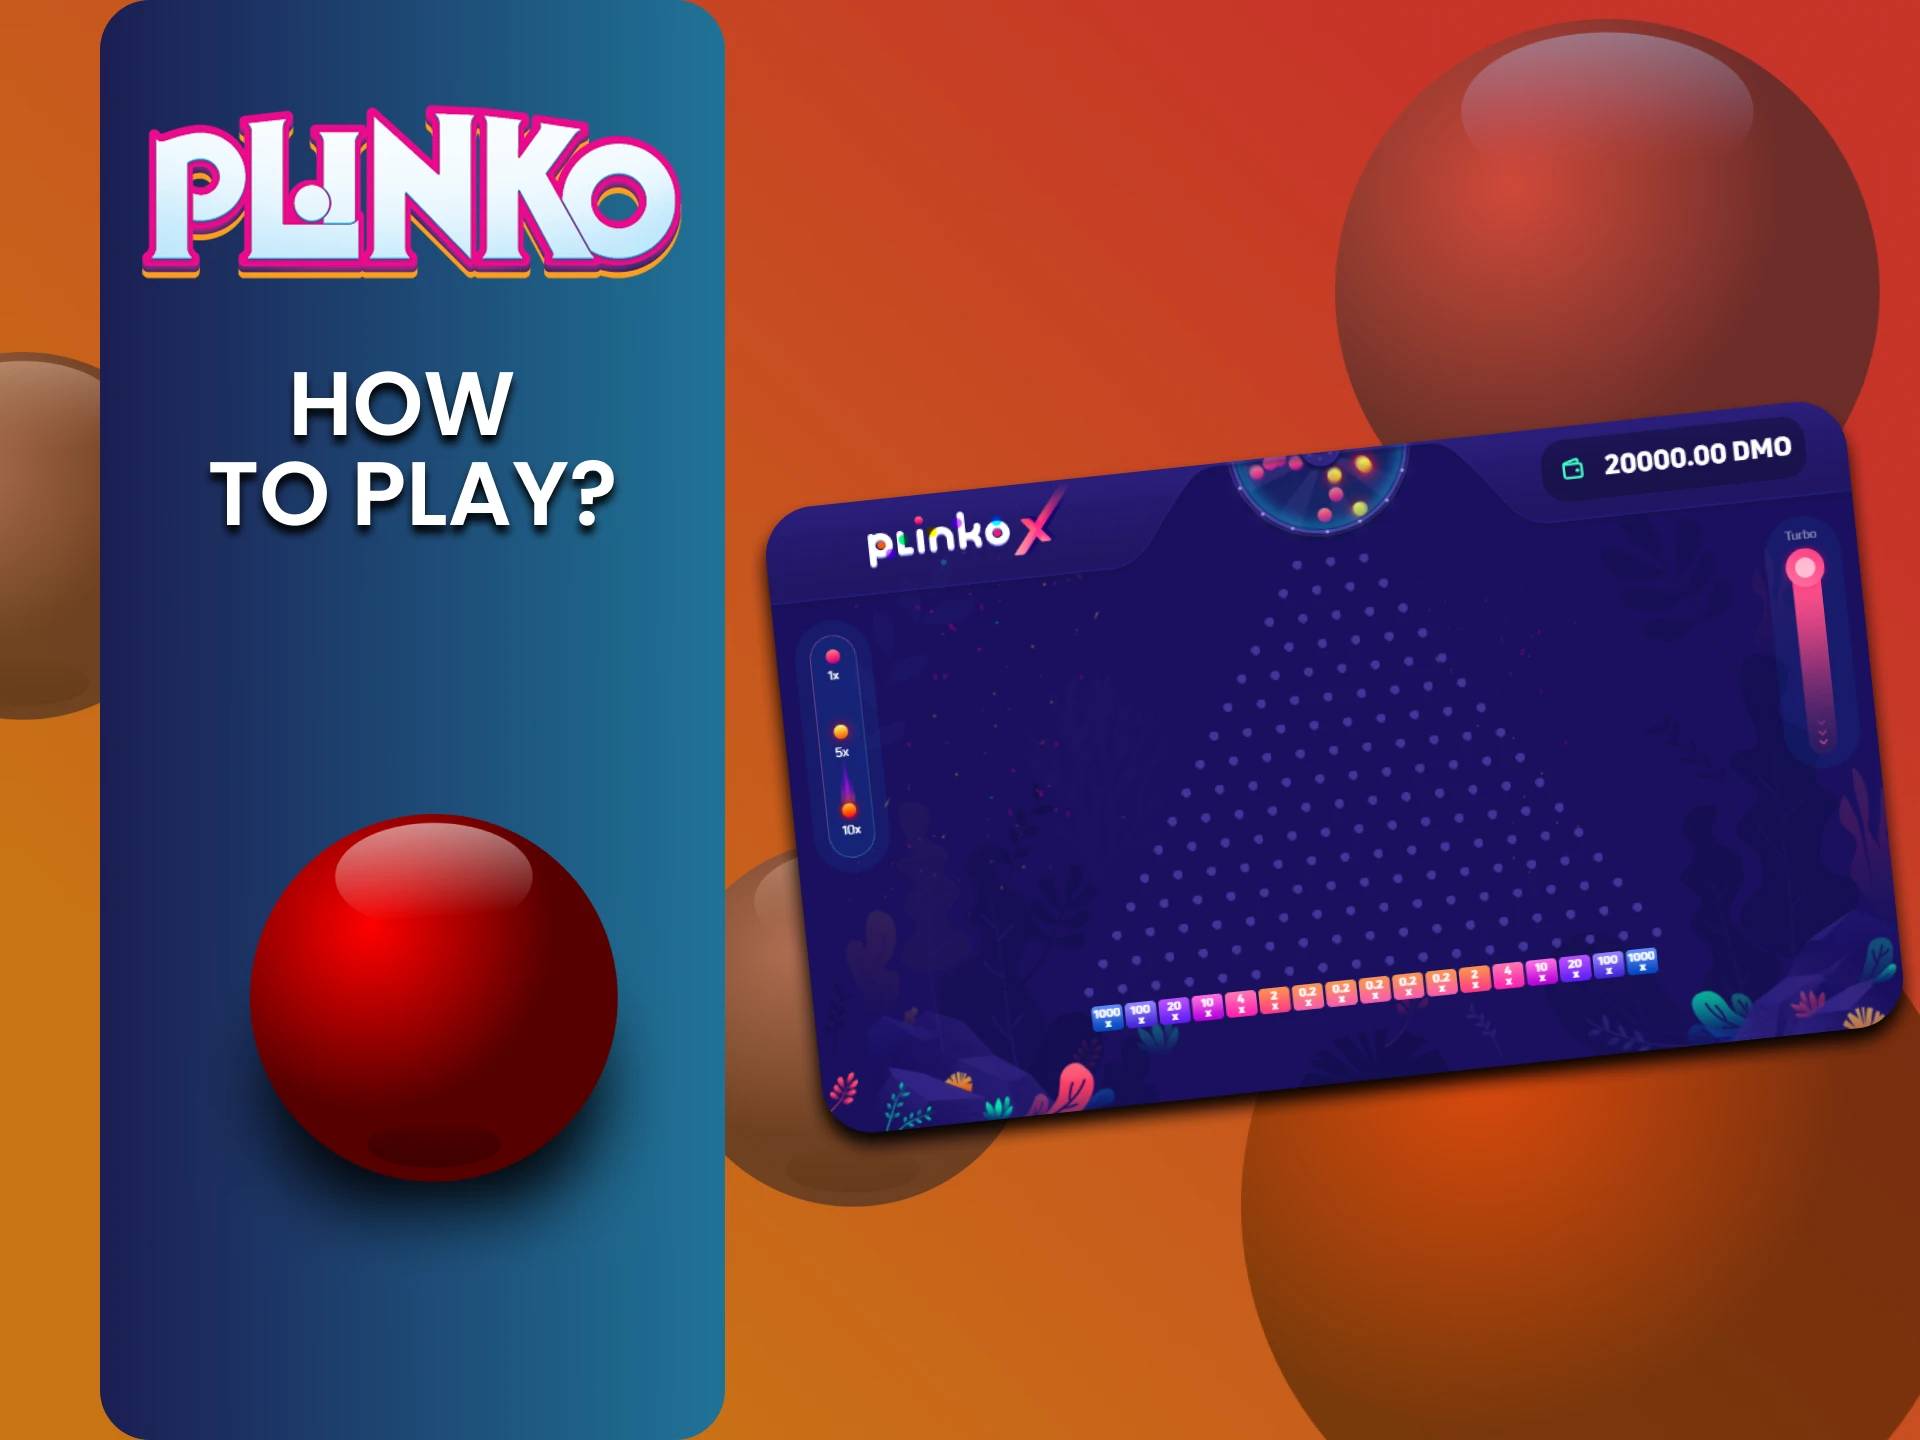 Read our recommendations on how to play Plinko.